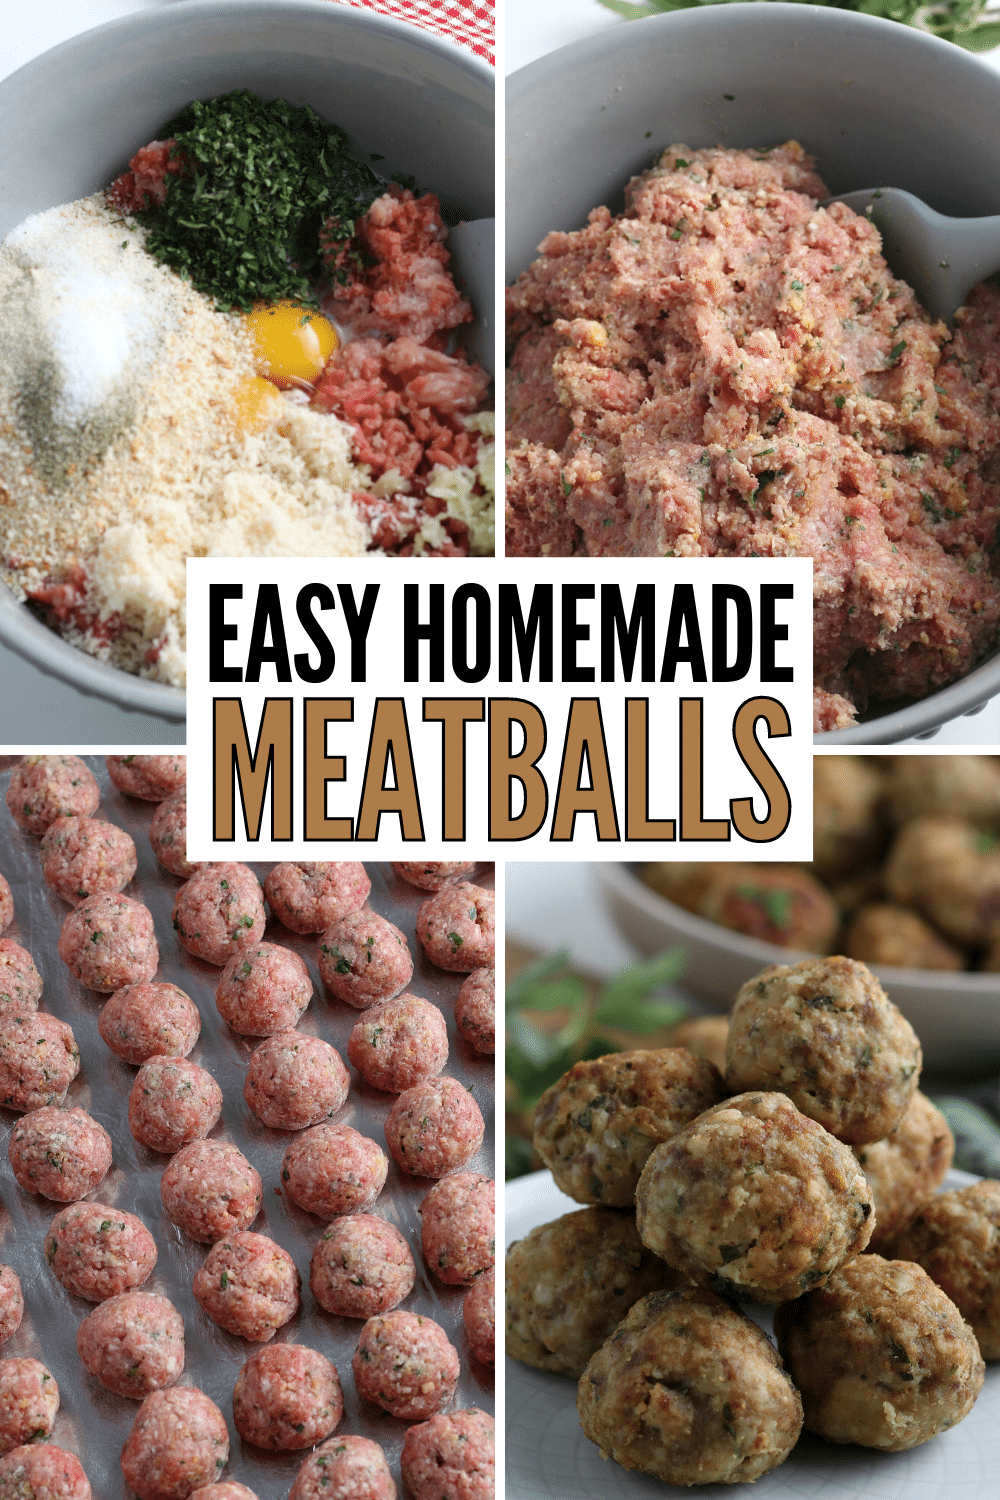 These Easy Homemade Meatballs are a simple way to get dinner on the table fast. Forget store-bought - make the best homemade meatball recipe. #homemade #meatballs #homemademeatballs #recipe via @wondermomwannab